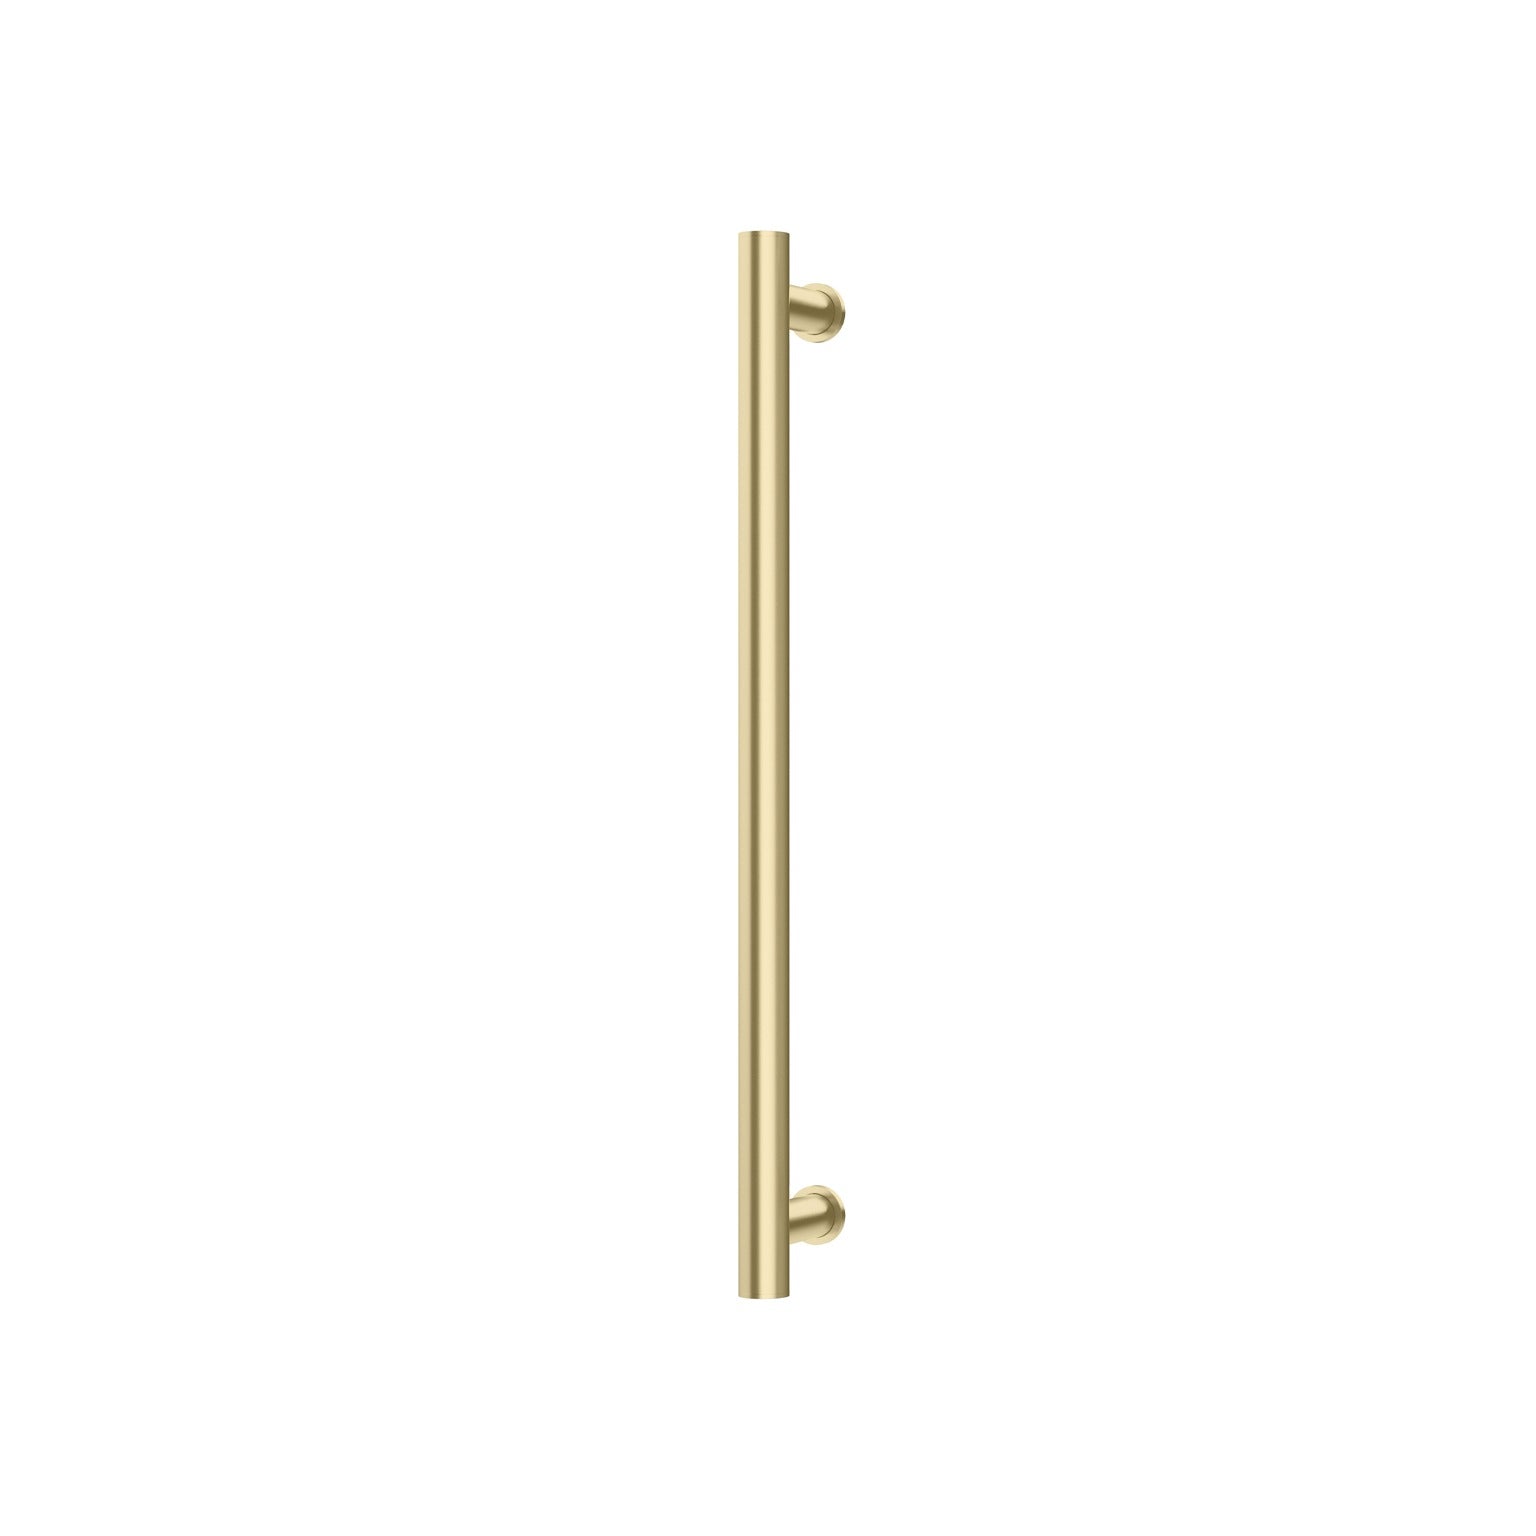 PHOENIX ROUND SINGLE HEATED TOWEL RAIL BRUSHED GOLD (AVAILABLE IN 600MM AND 800MM)